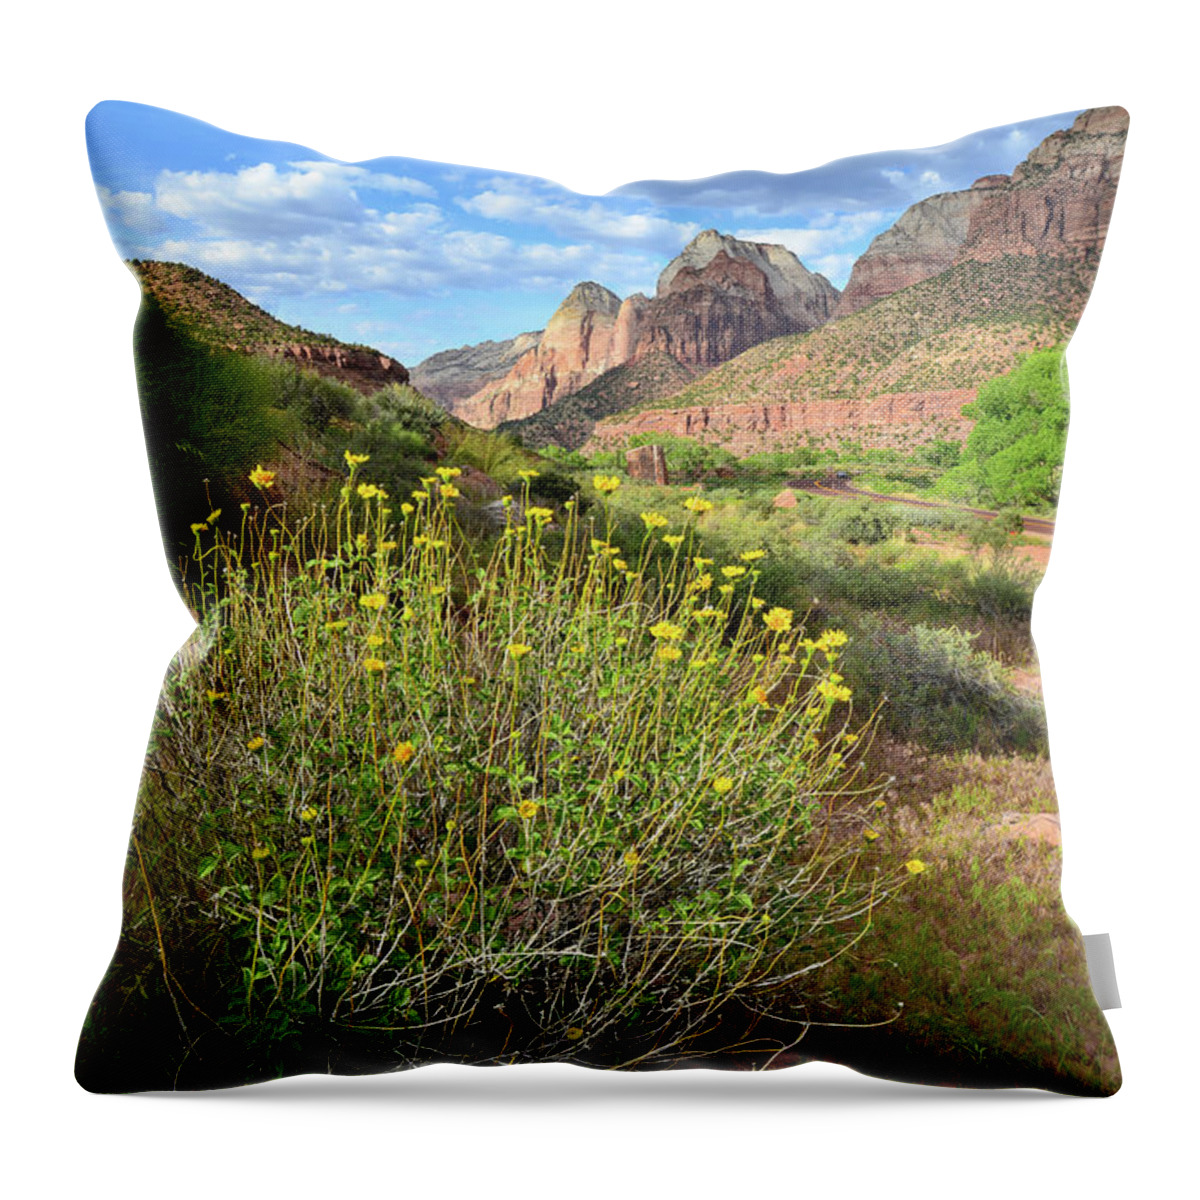 Zion National Park Throw Pillow featuring the photograph Zion Wildflowers by Ray Mathis